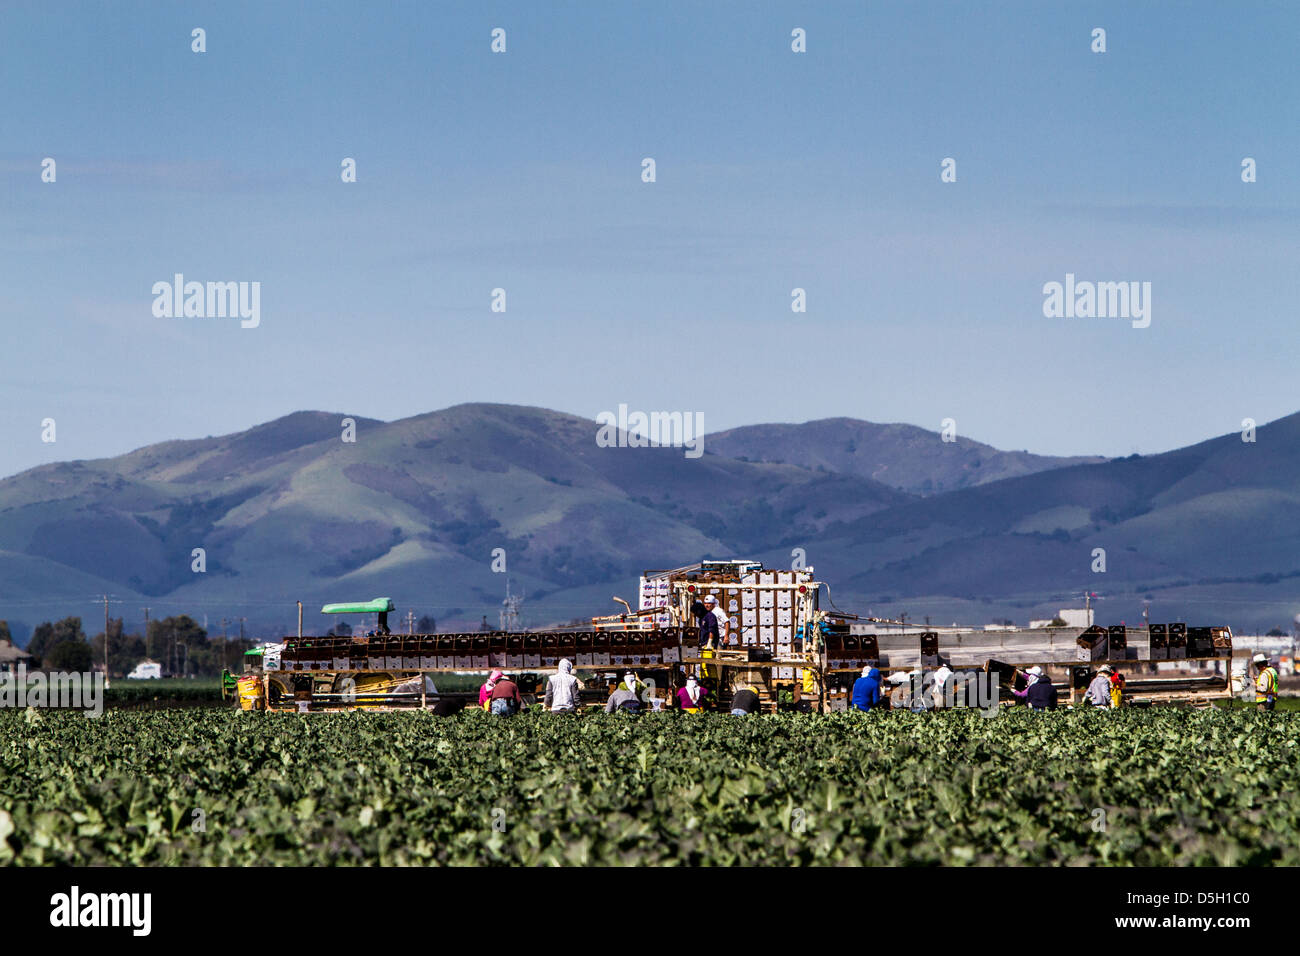 Farm Workers picking broccoli in the Salinas Valley of California Stock Photo